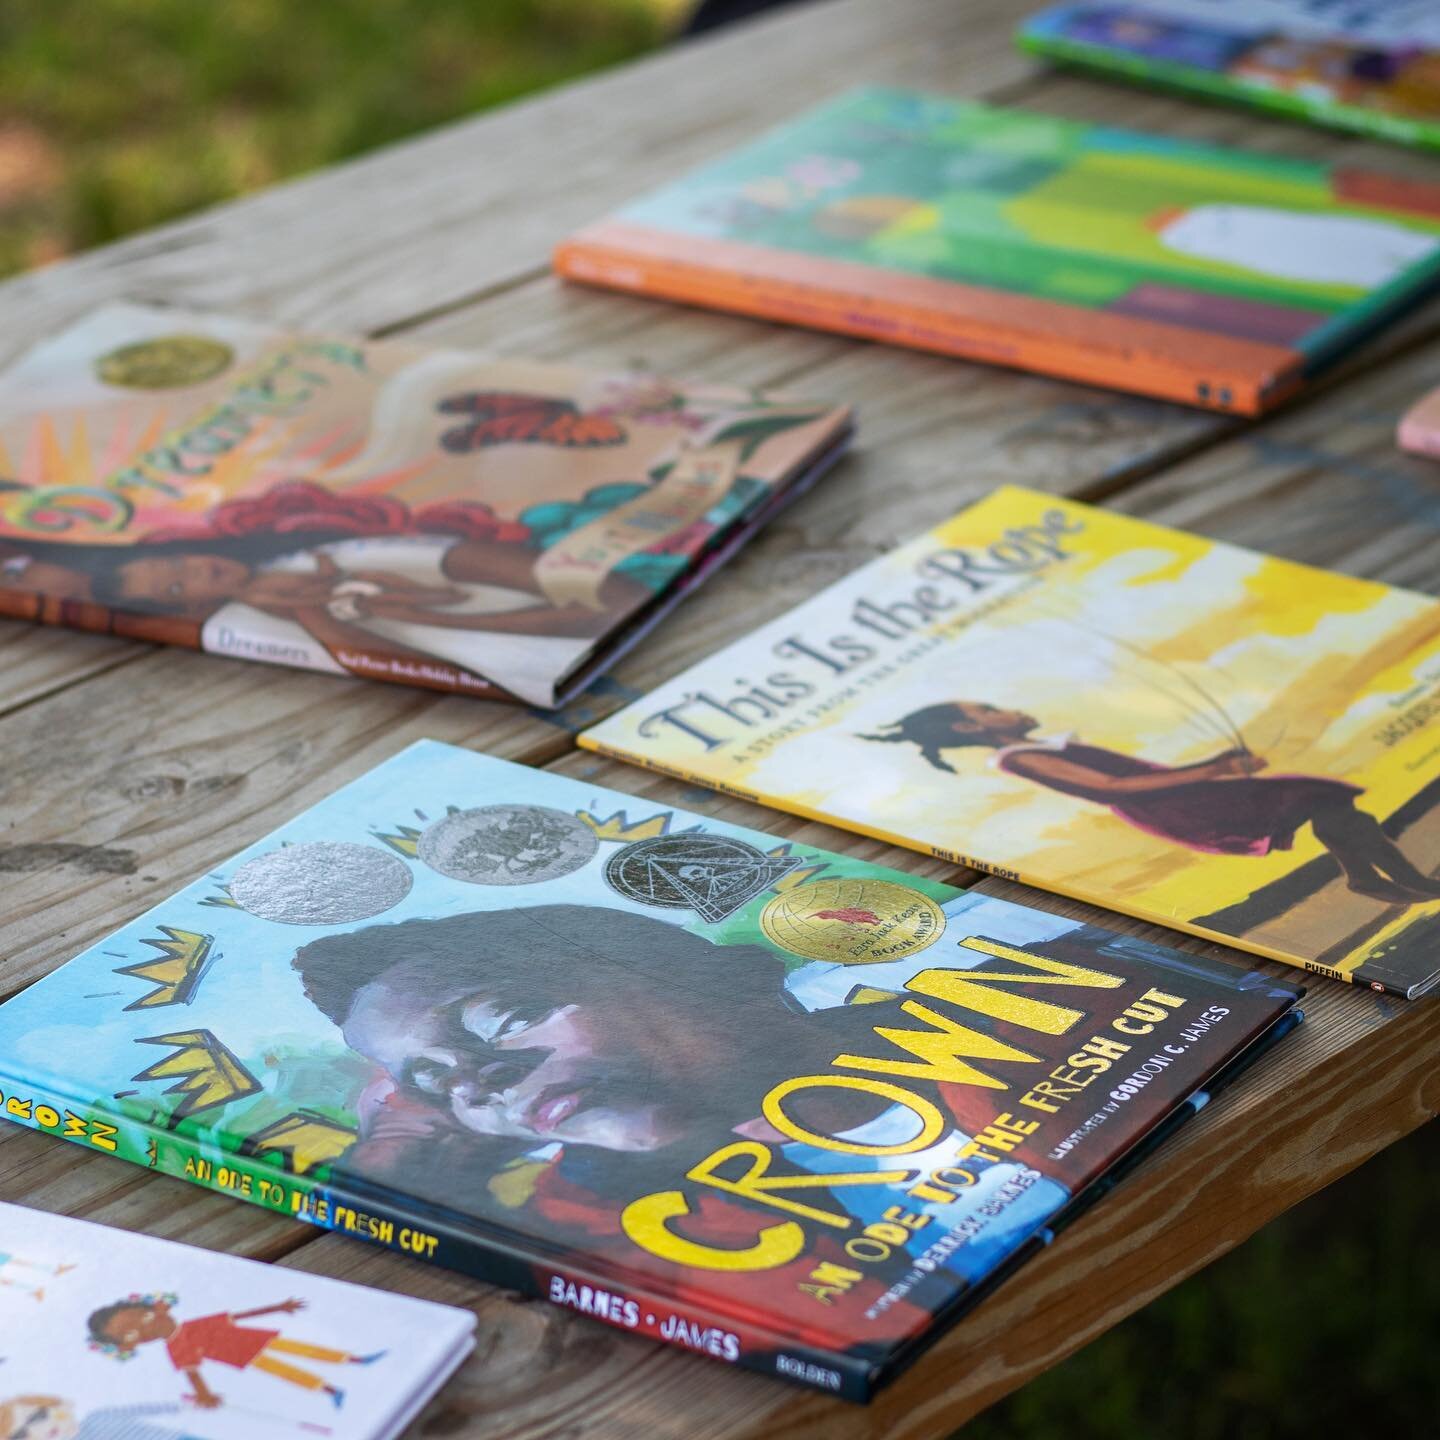 Summer is here! What's on your reading list?
.
.
.
.
.
#philly #childrensbooks #kidlit #earlyliteracy #diversebooks #bookstagram #diversechildrensbooks